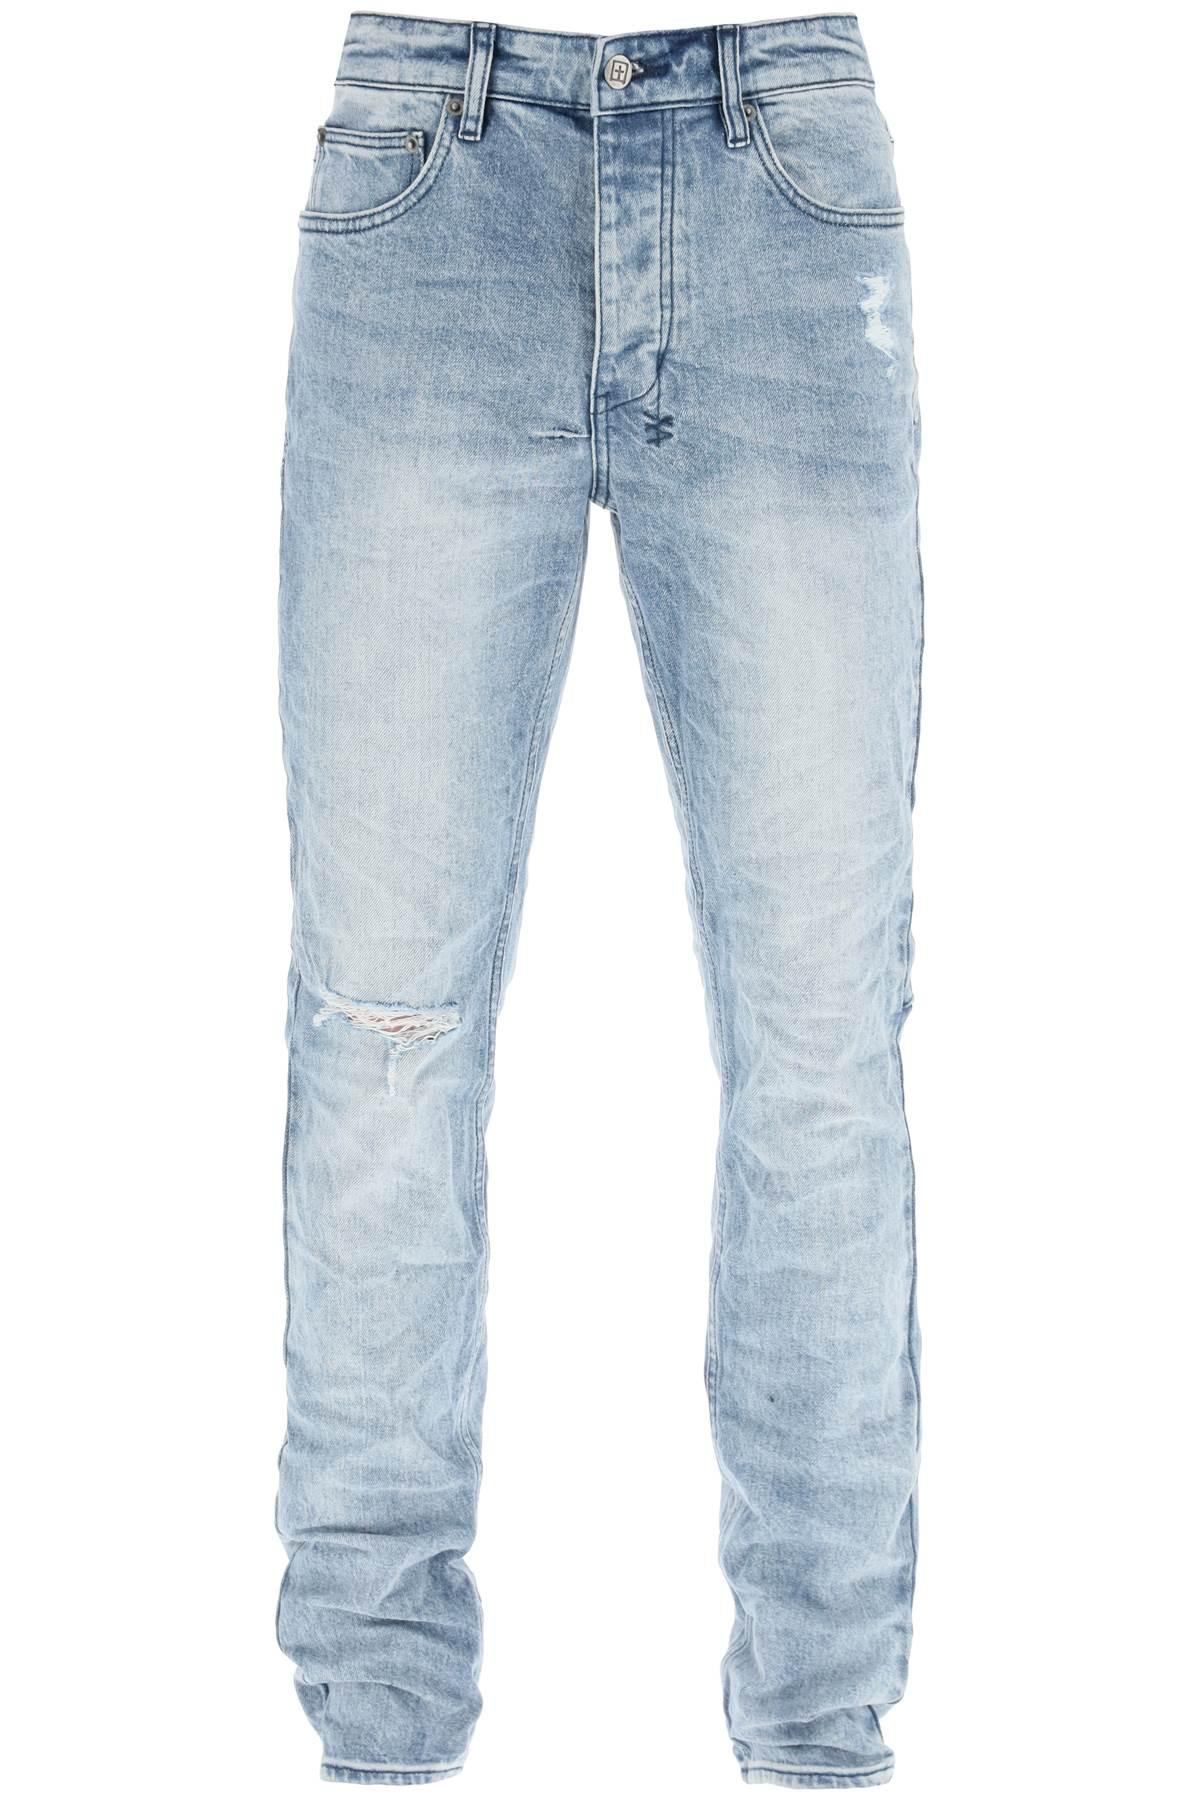 Ksubi Chitch Spray Out Yellow Slim Fit Jeans in Blue for Men | Lyst